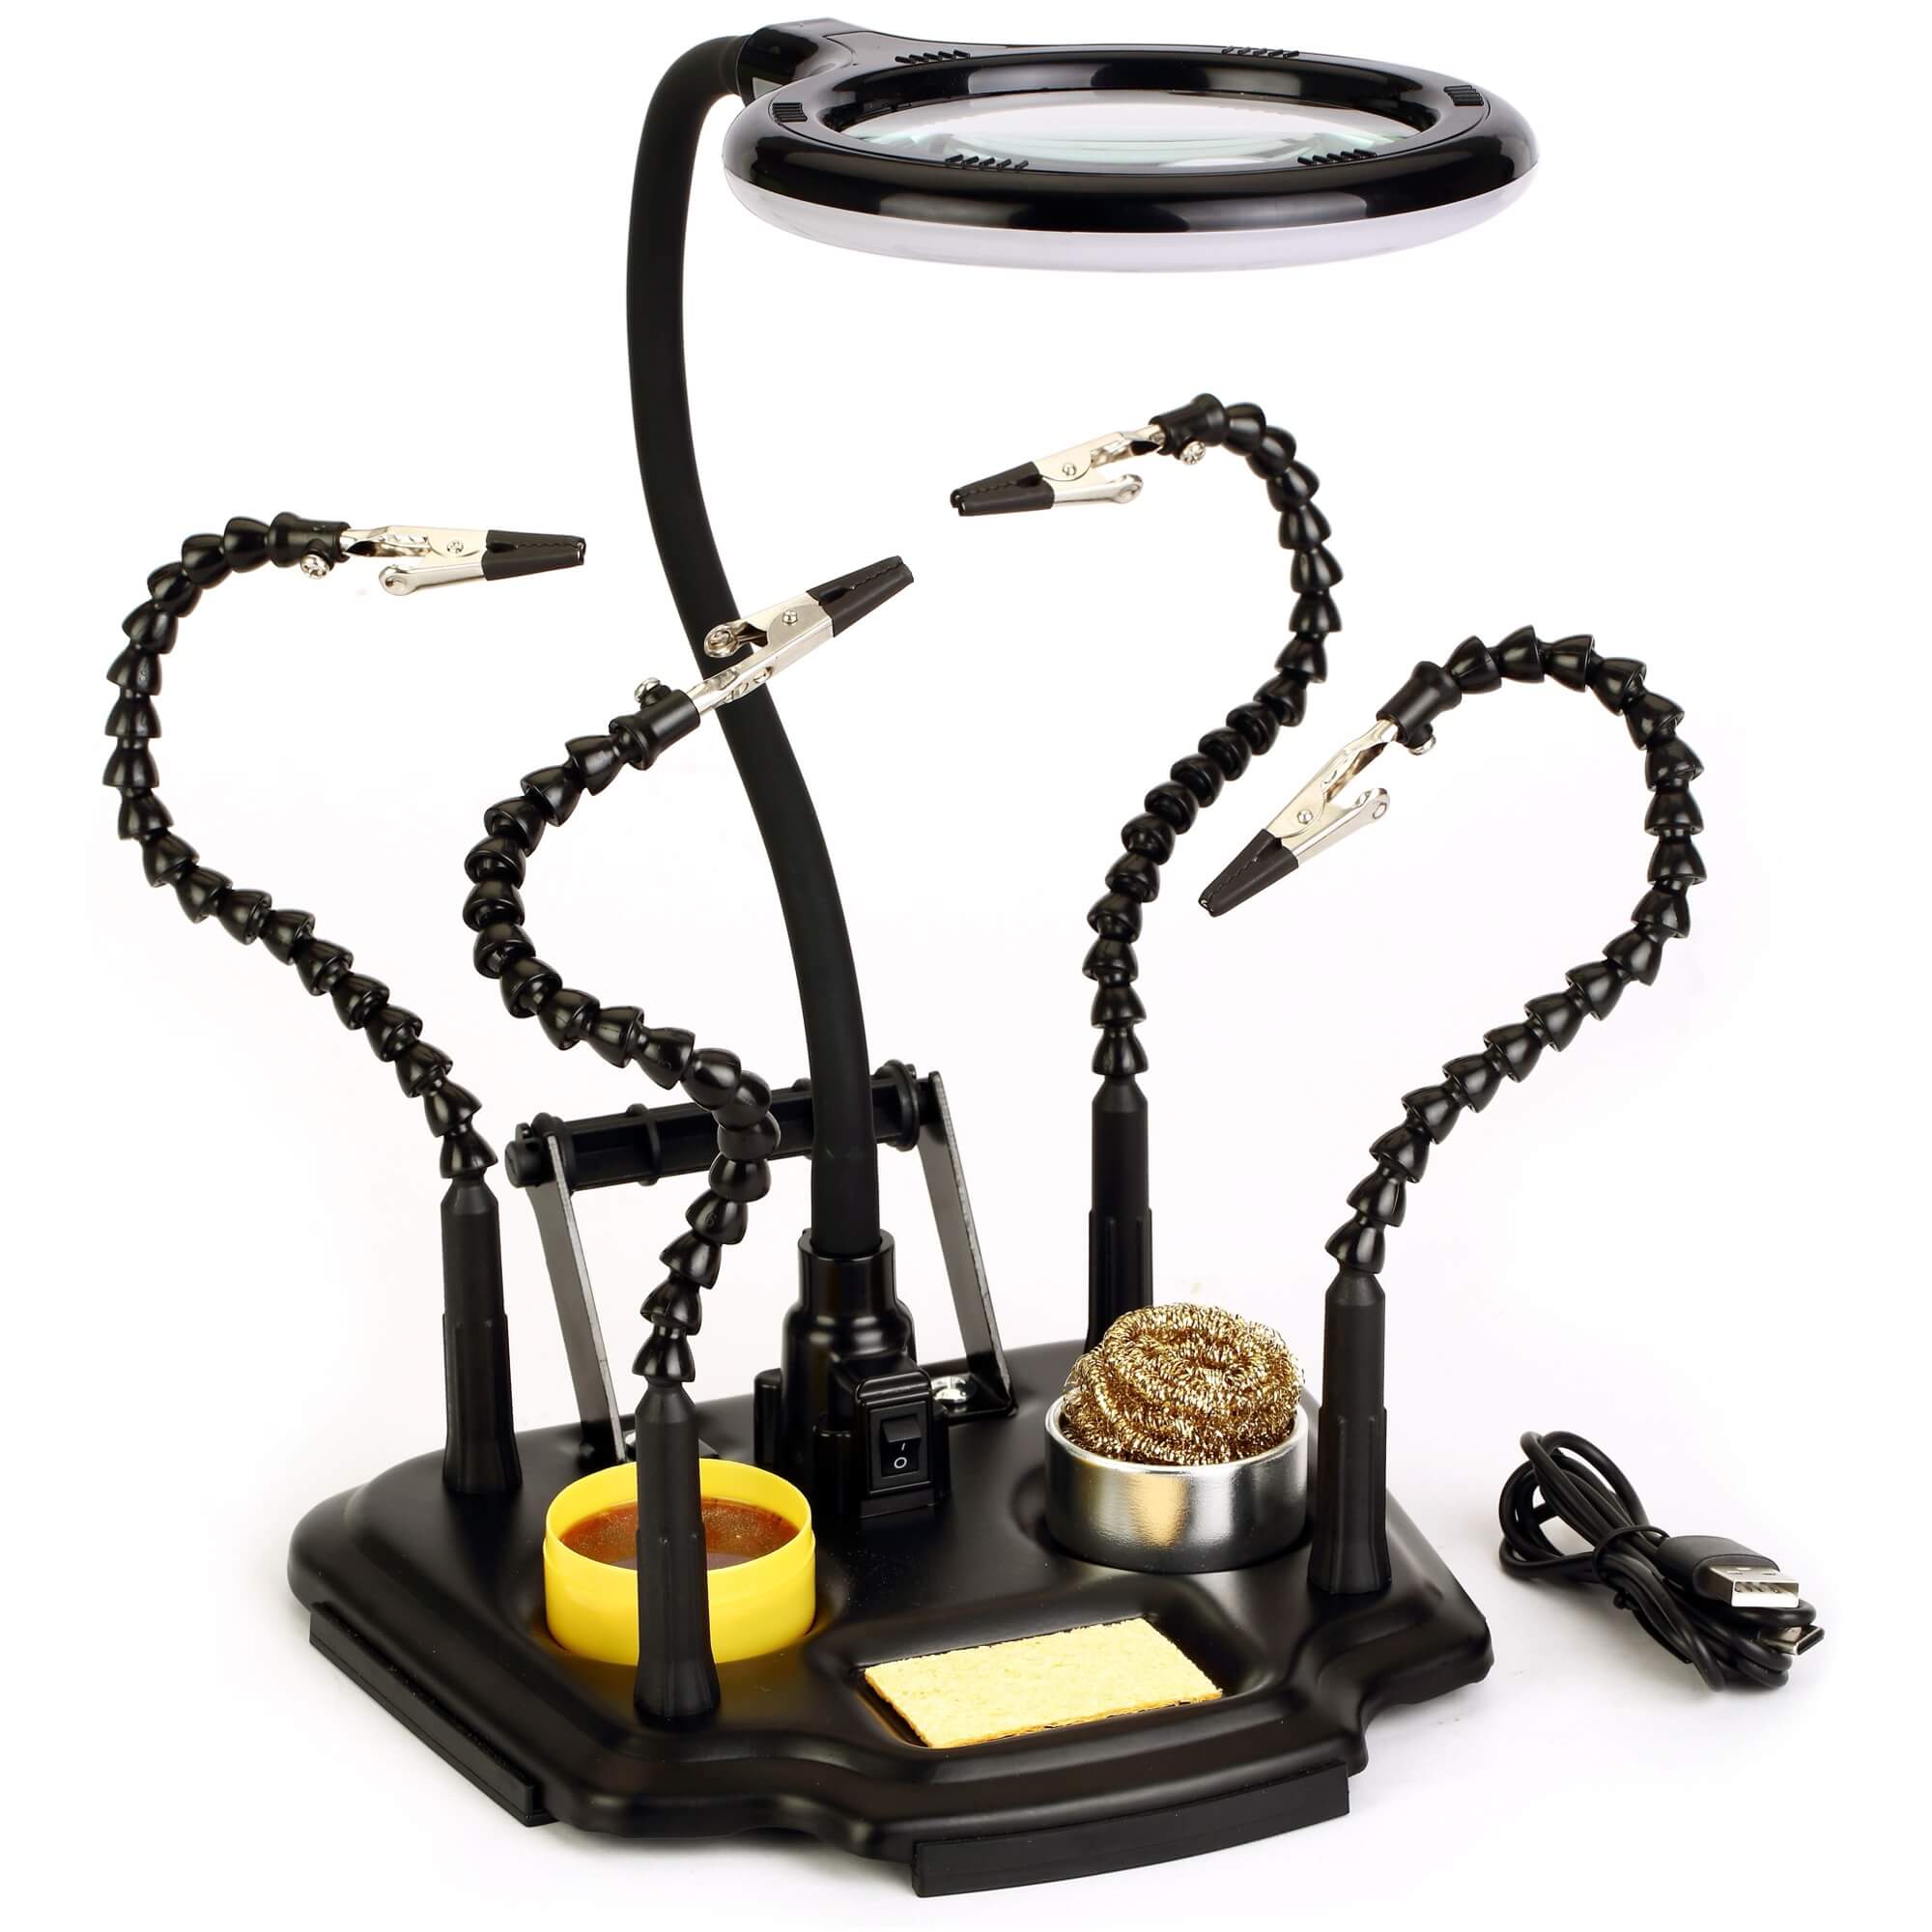 ZD-11M-3 PCB holder, 4 flexible arms, LED magnifying lamp